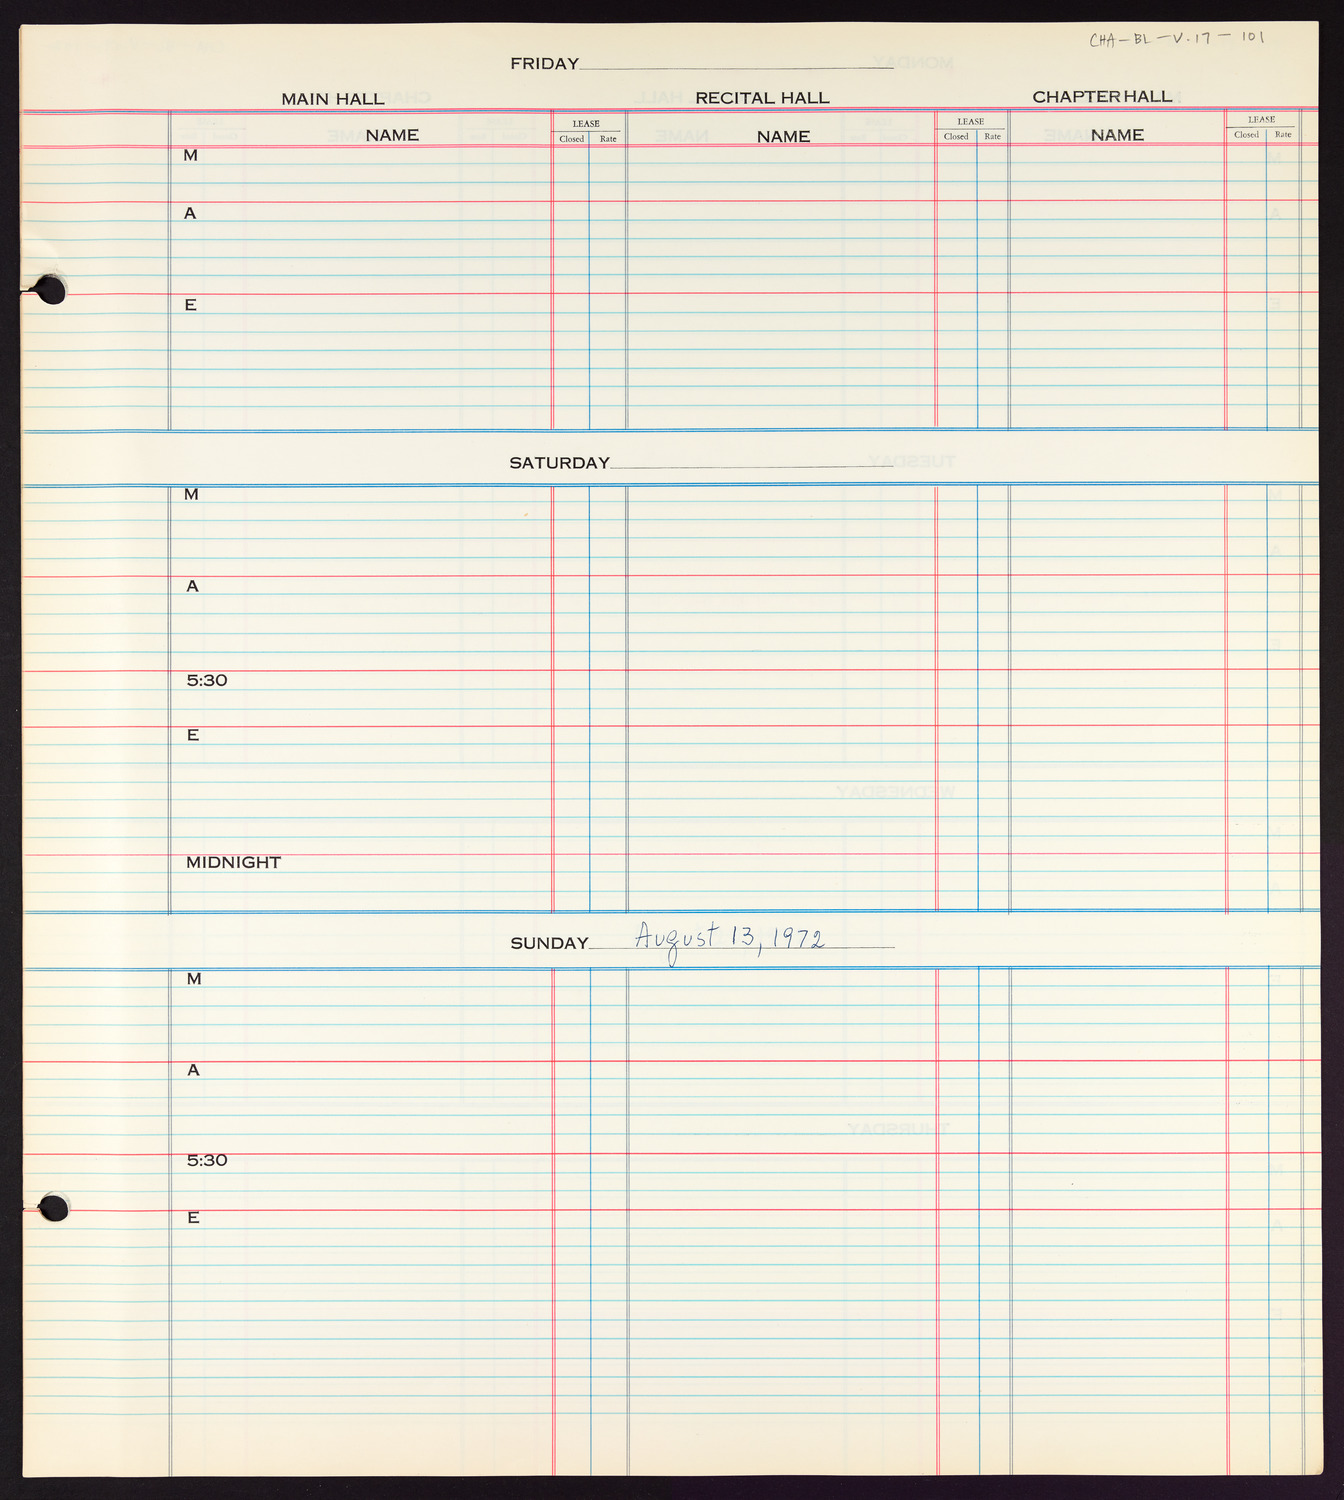 Carnegie Hall Booking Ledger, volume 17, page 101